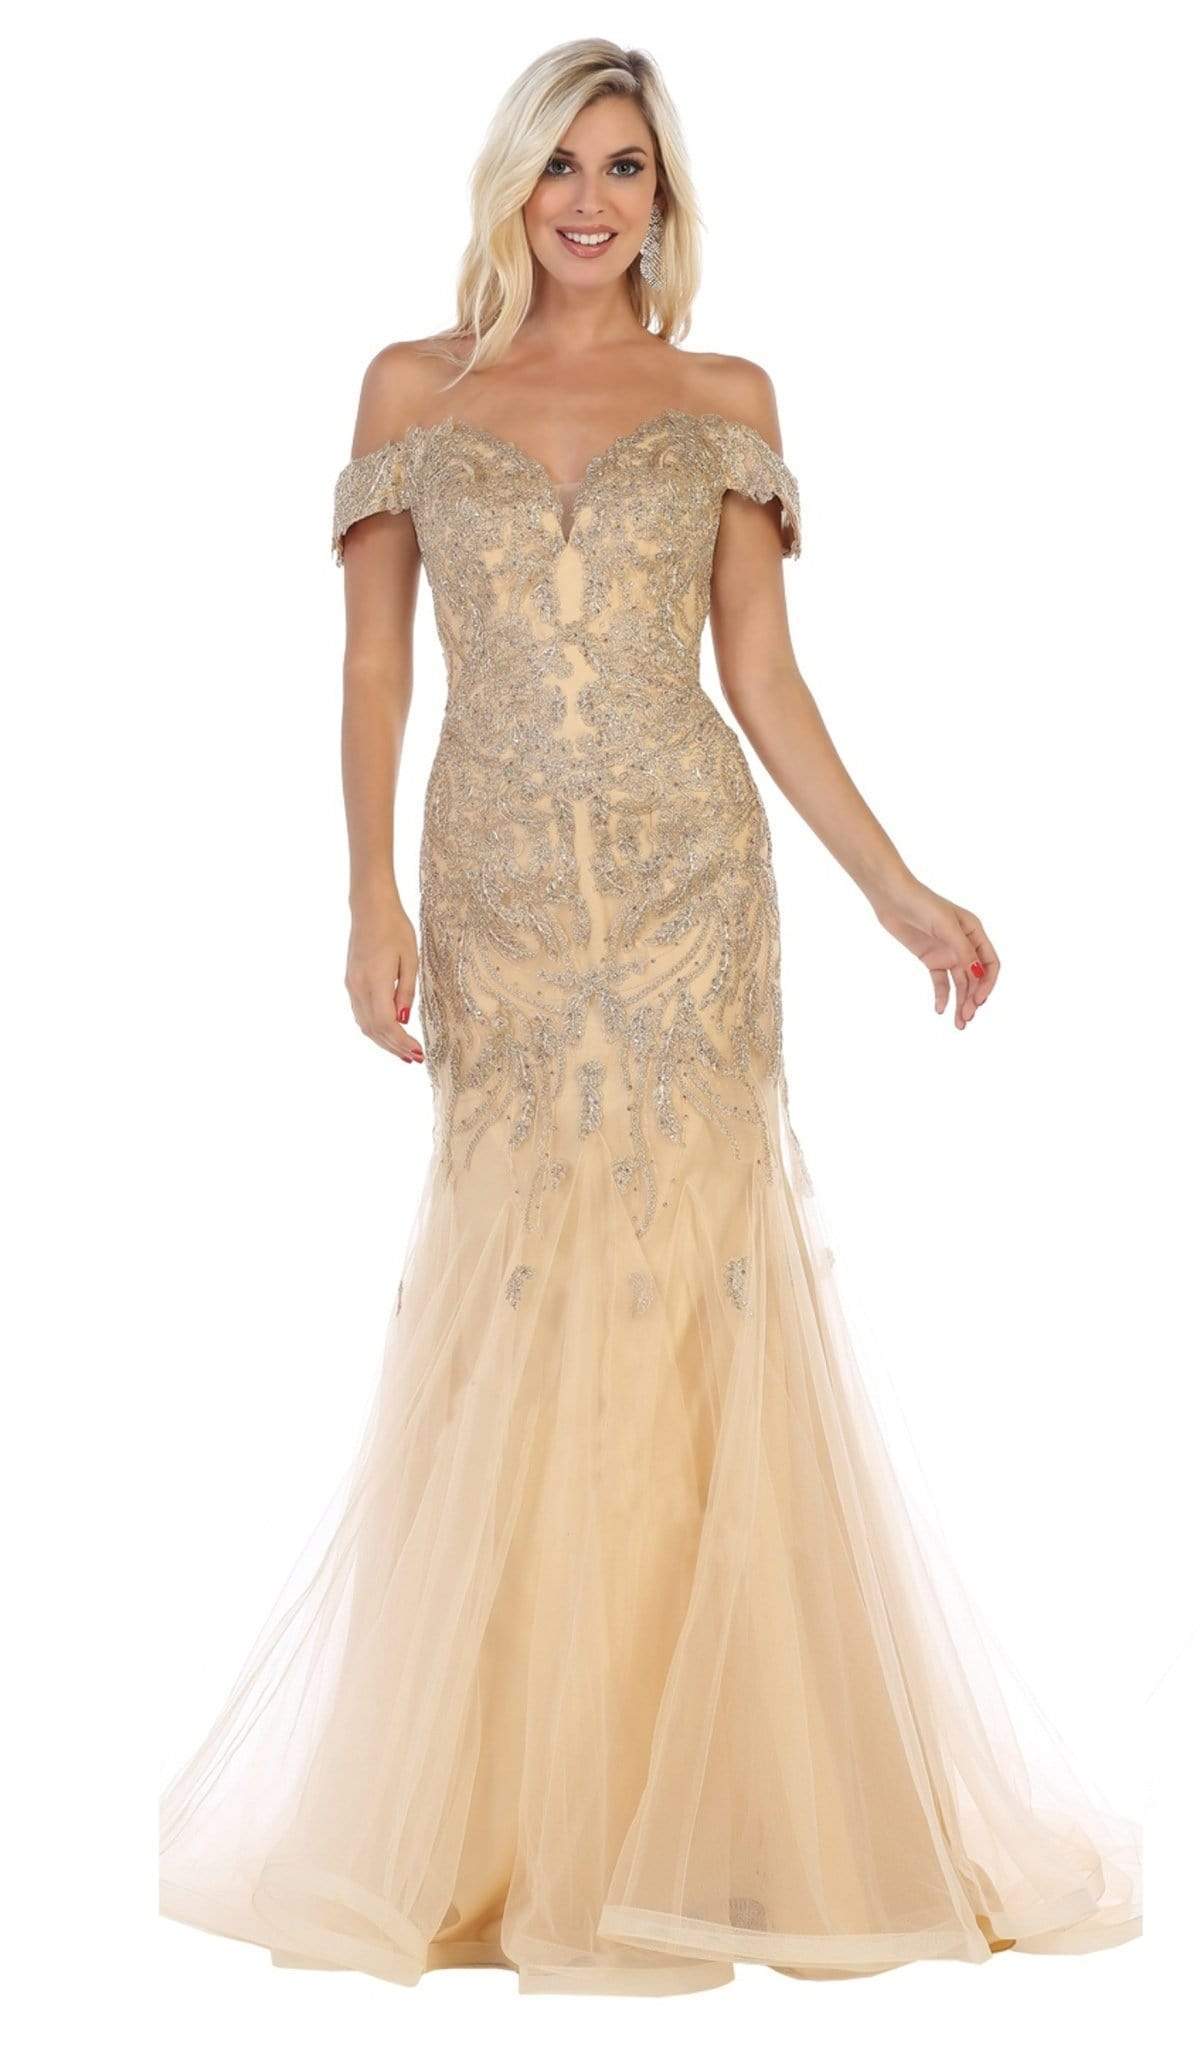 May Queen - Trailing Foliage Off Shoulder Trumpet Gown RQ7705 - 1 pc Gold In Size 8 Available CCSALE 8 / Gold